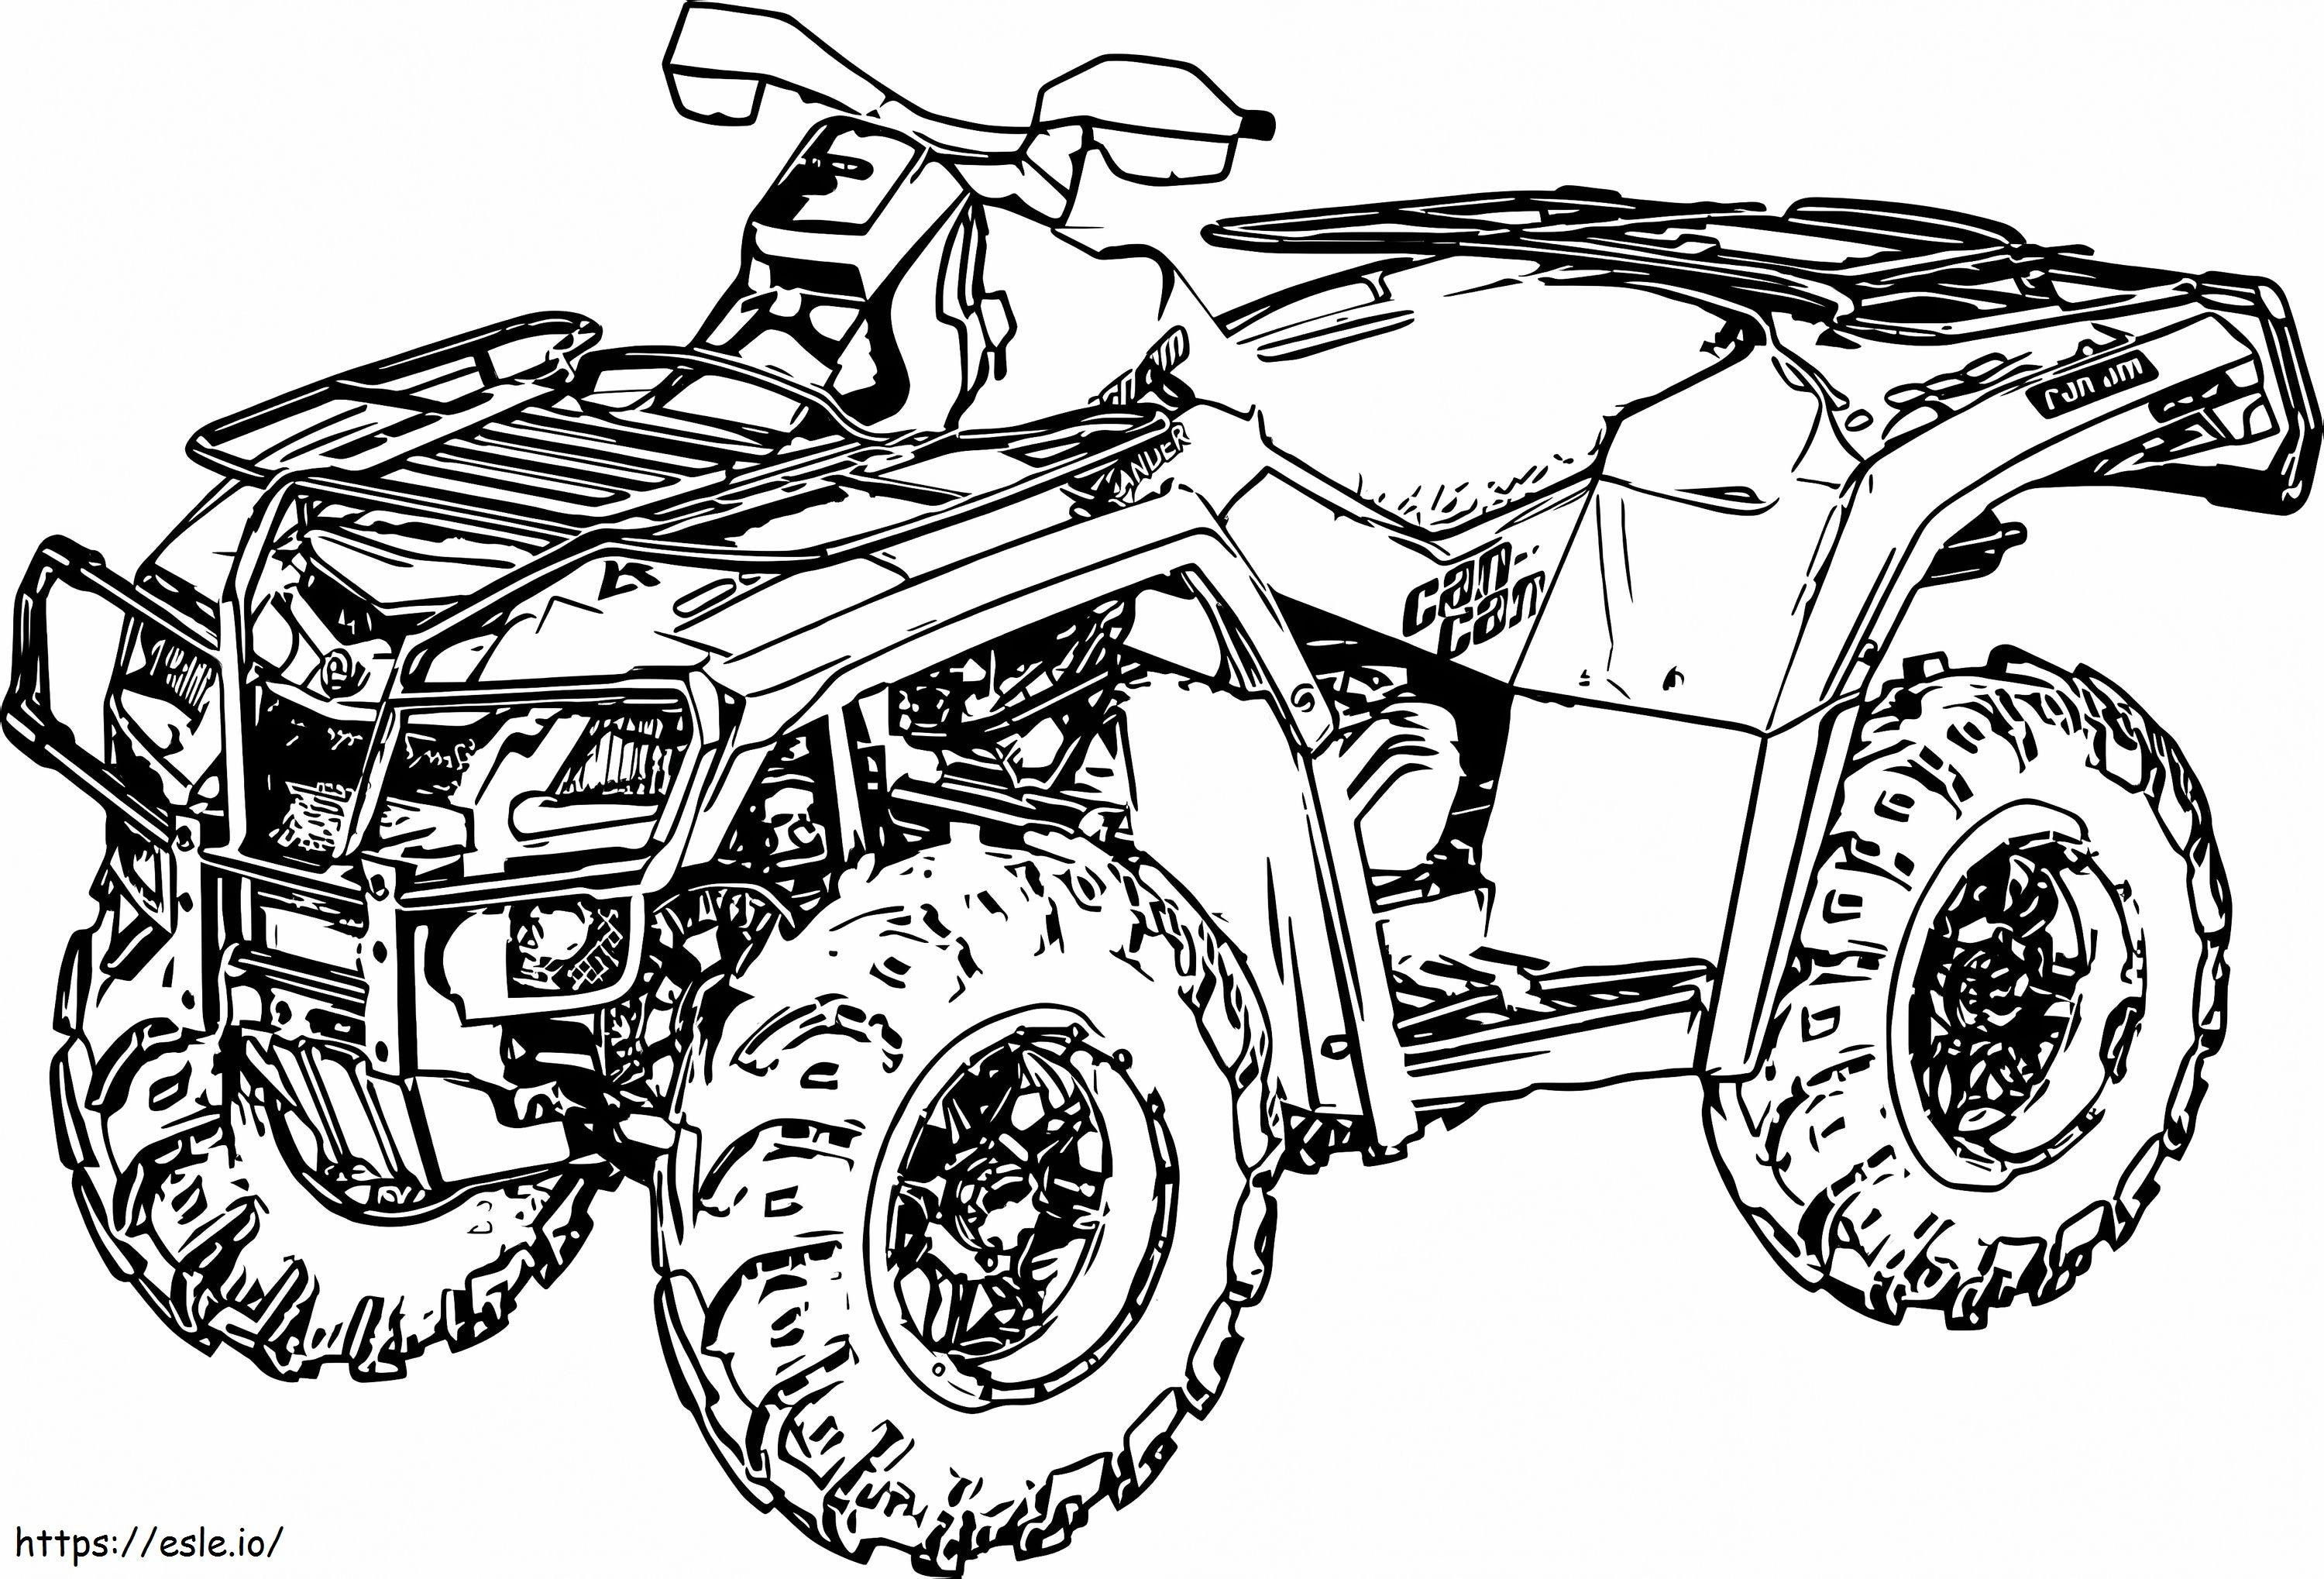 Cool ATV coloring page